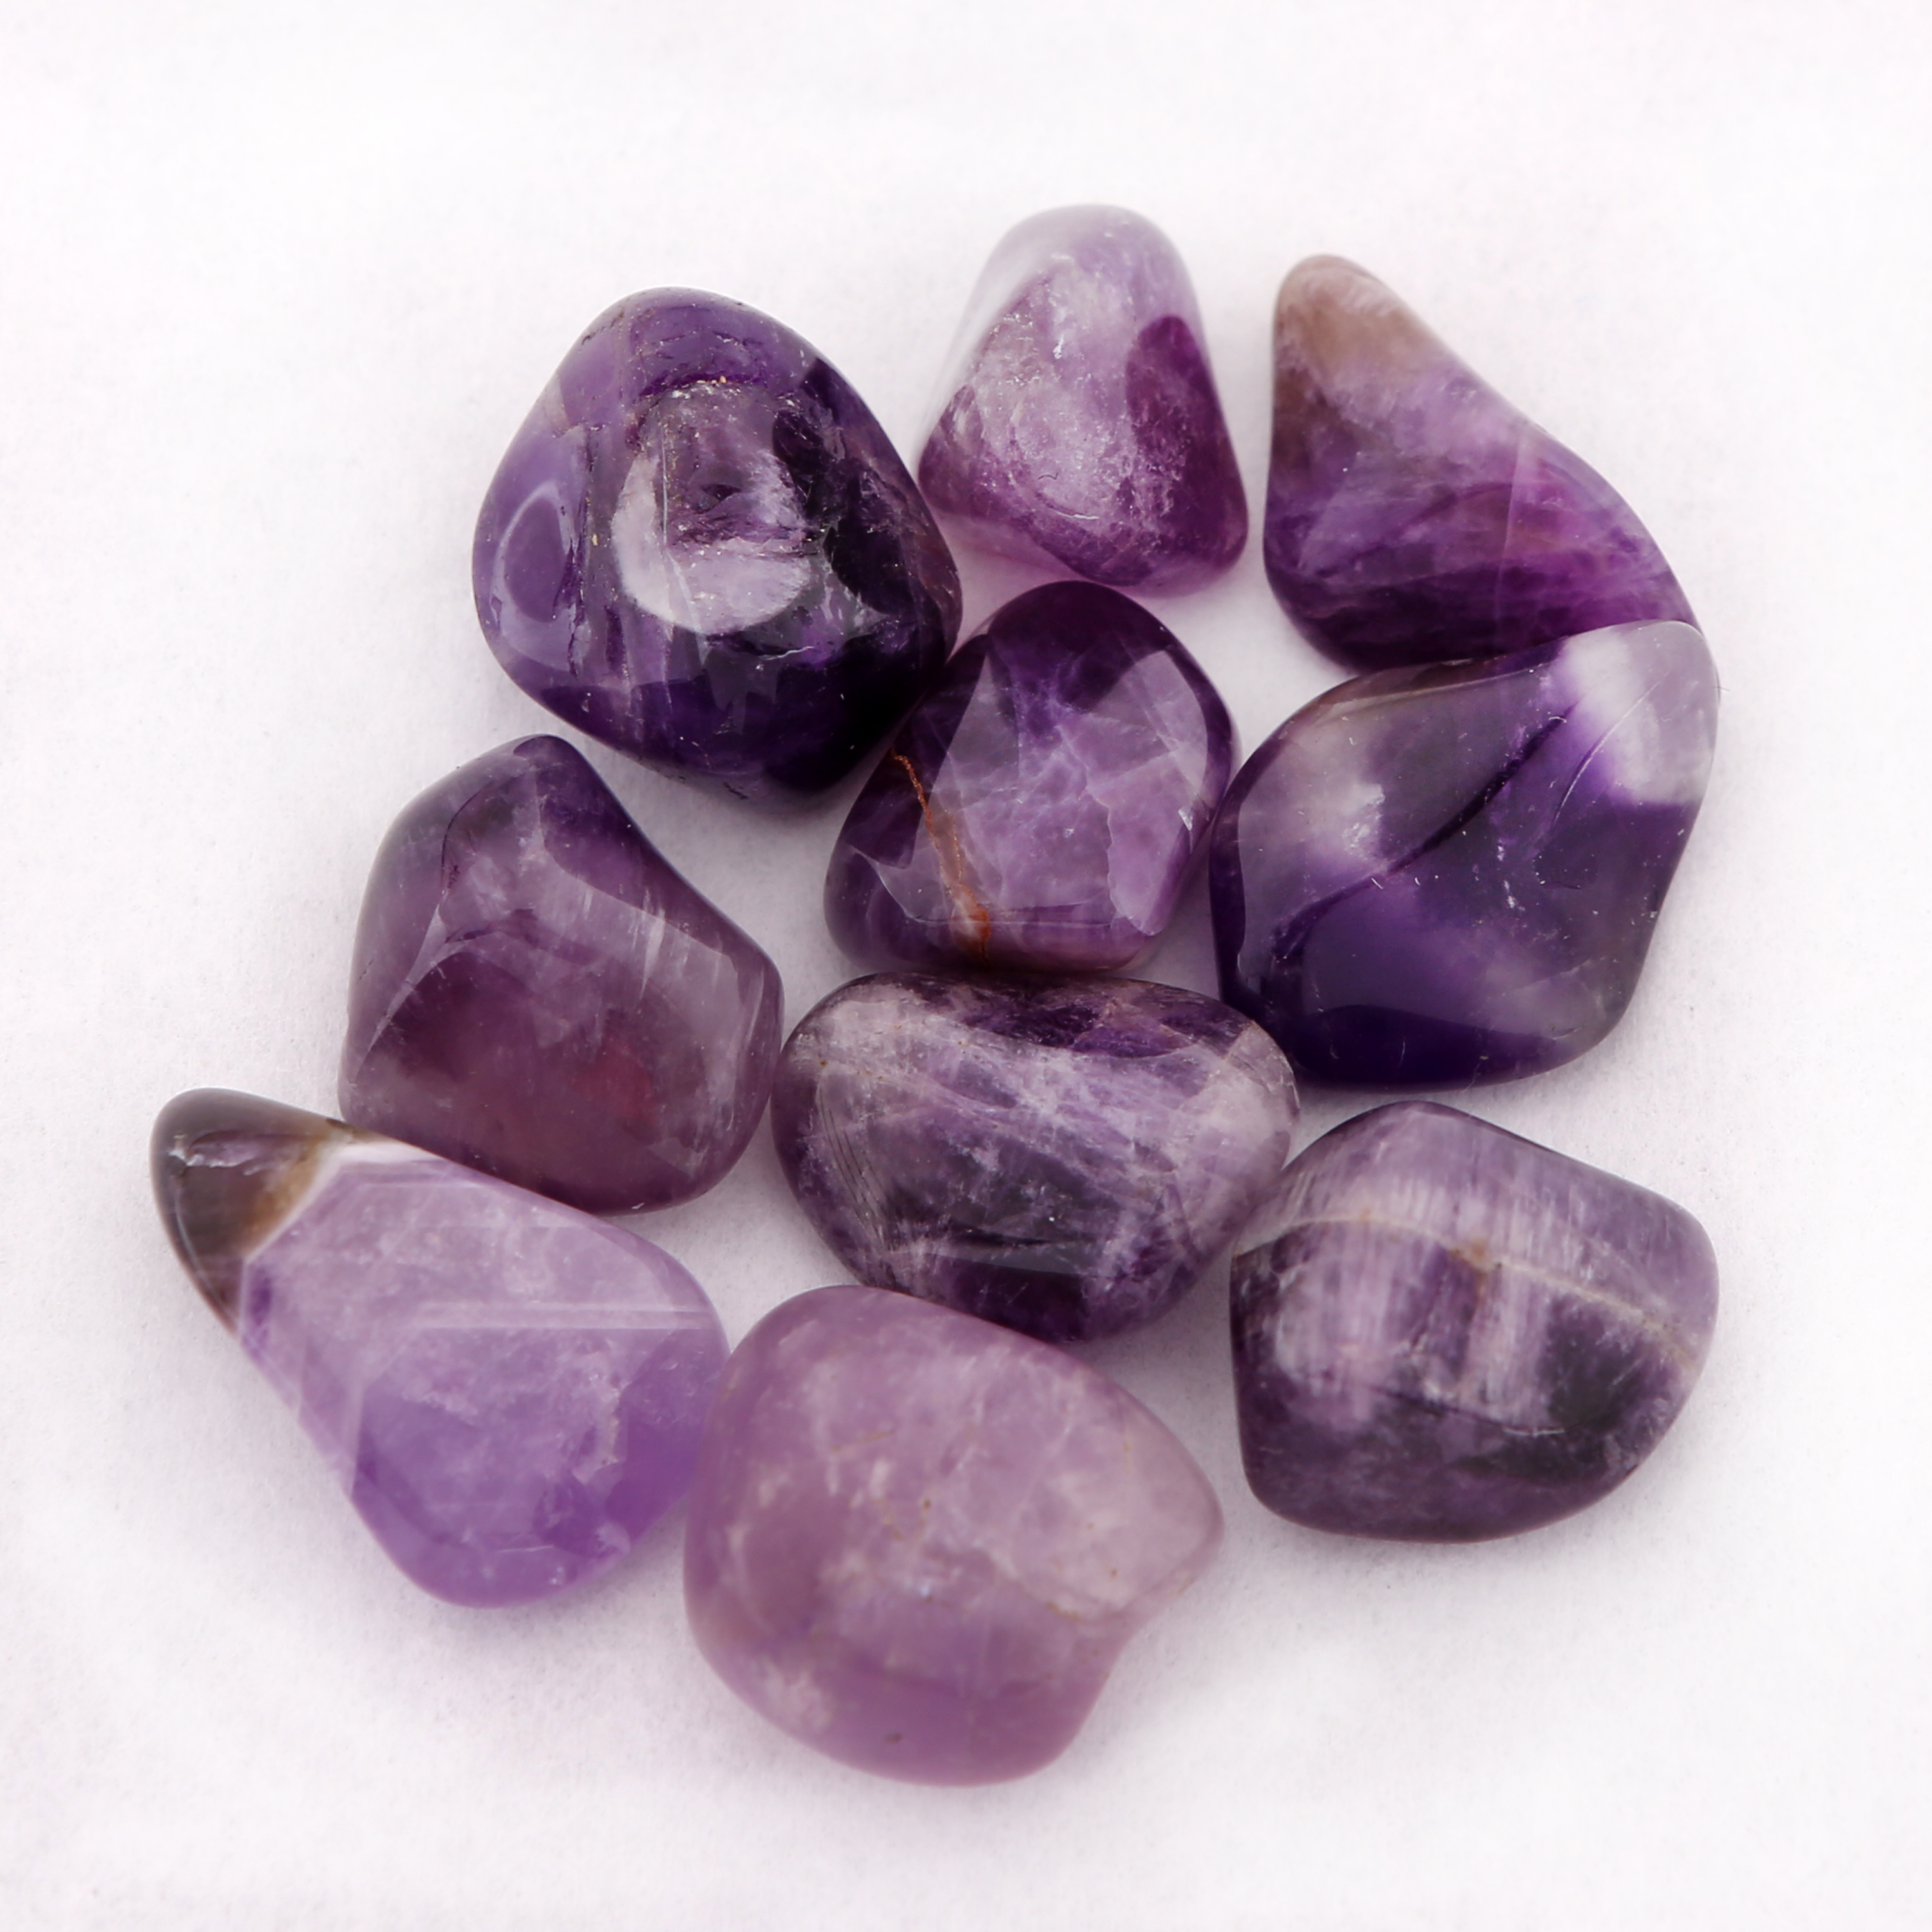 Amethyst Tumbled Stone - Celestial Earth Minerals